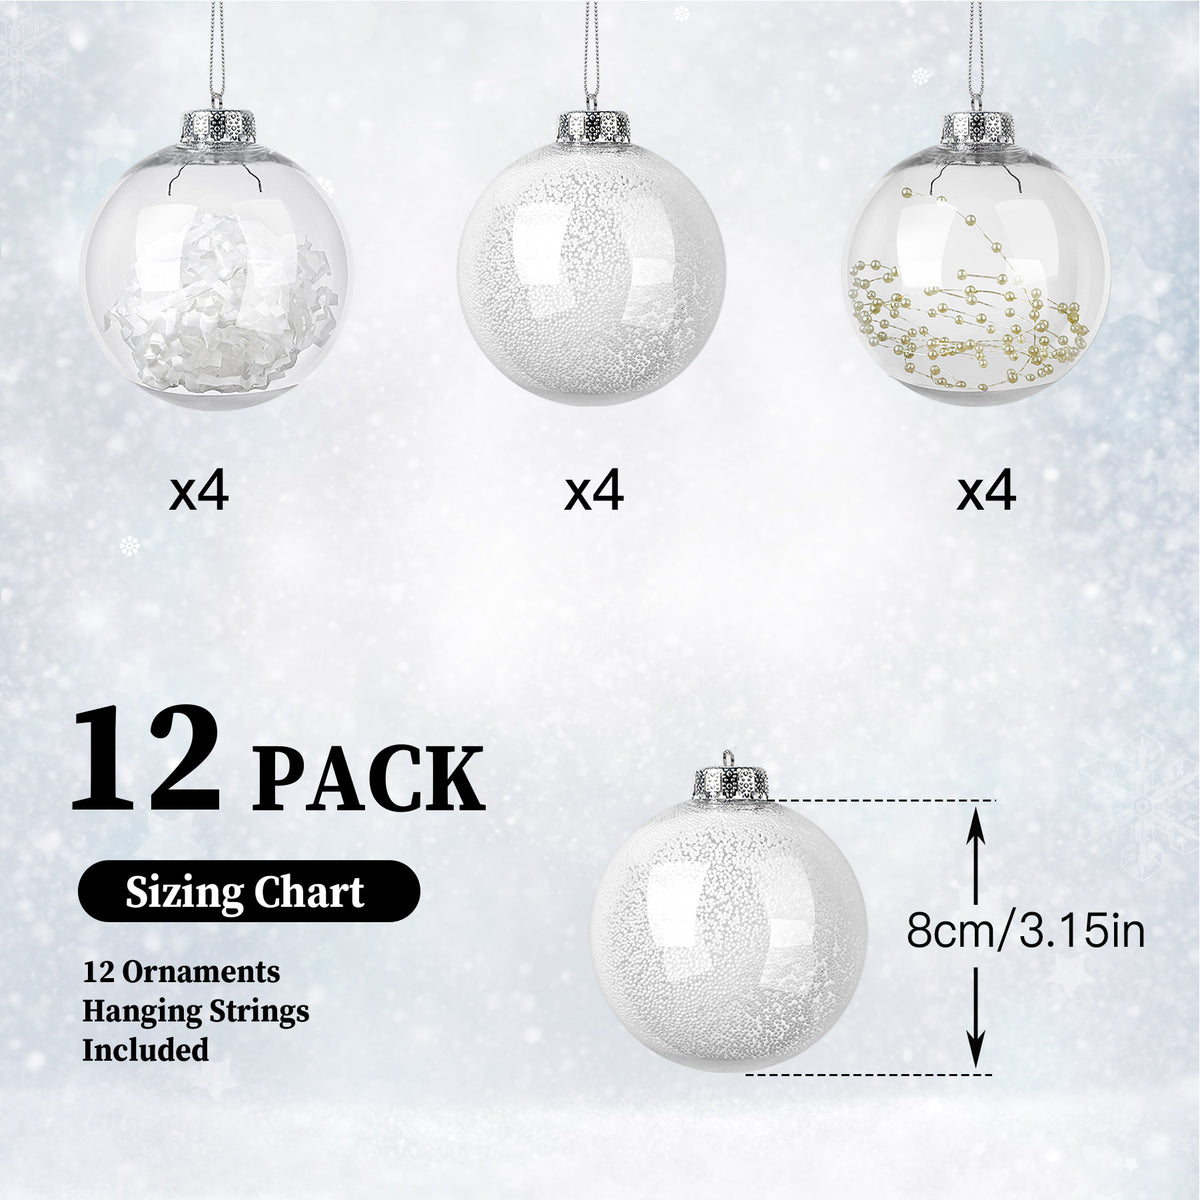 SHareconn 80MM/3.15" Clear Christmas Balls Ornaments,12PCS Shatterproof Plastic Decorative Baubles for Xmas Tree Decor Holiday Party Wedding Decoration